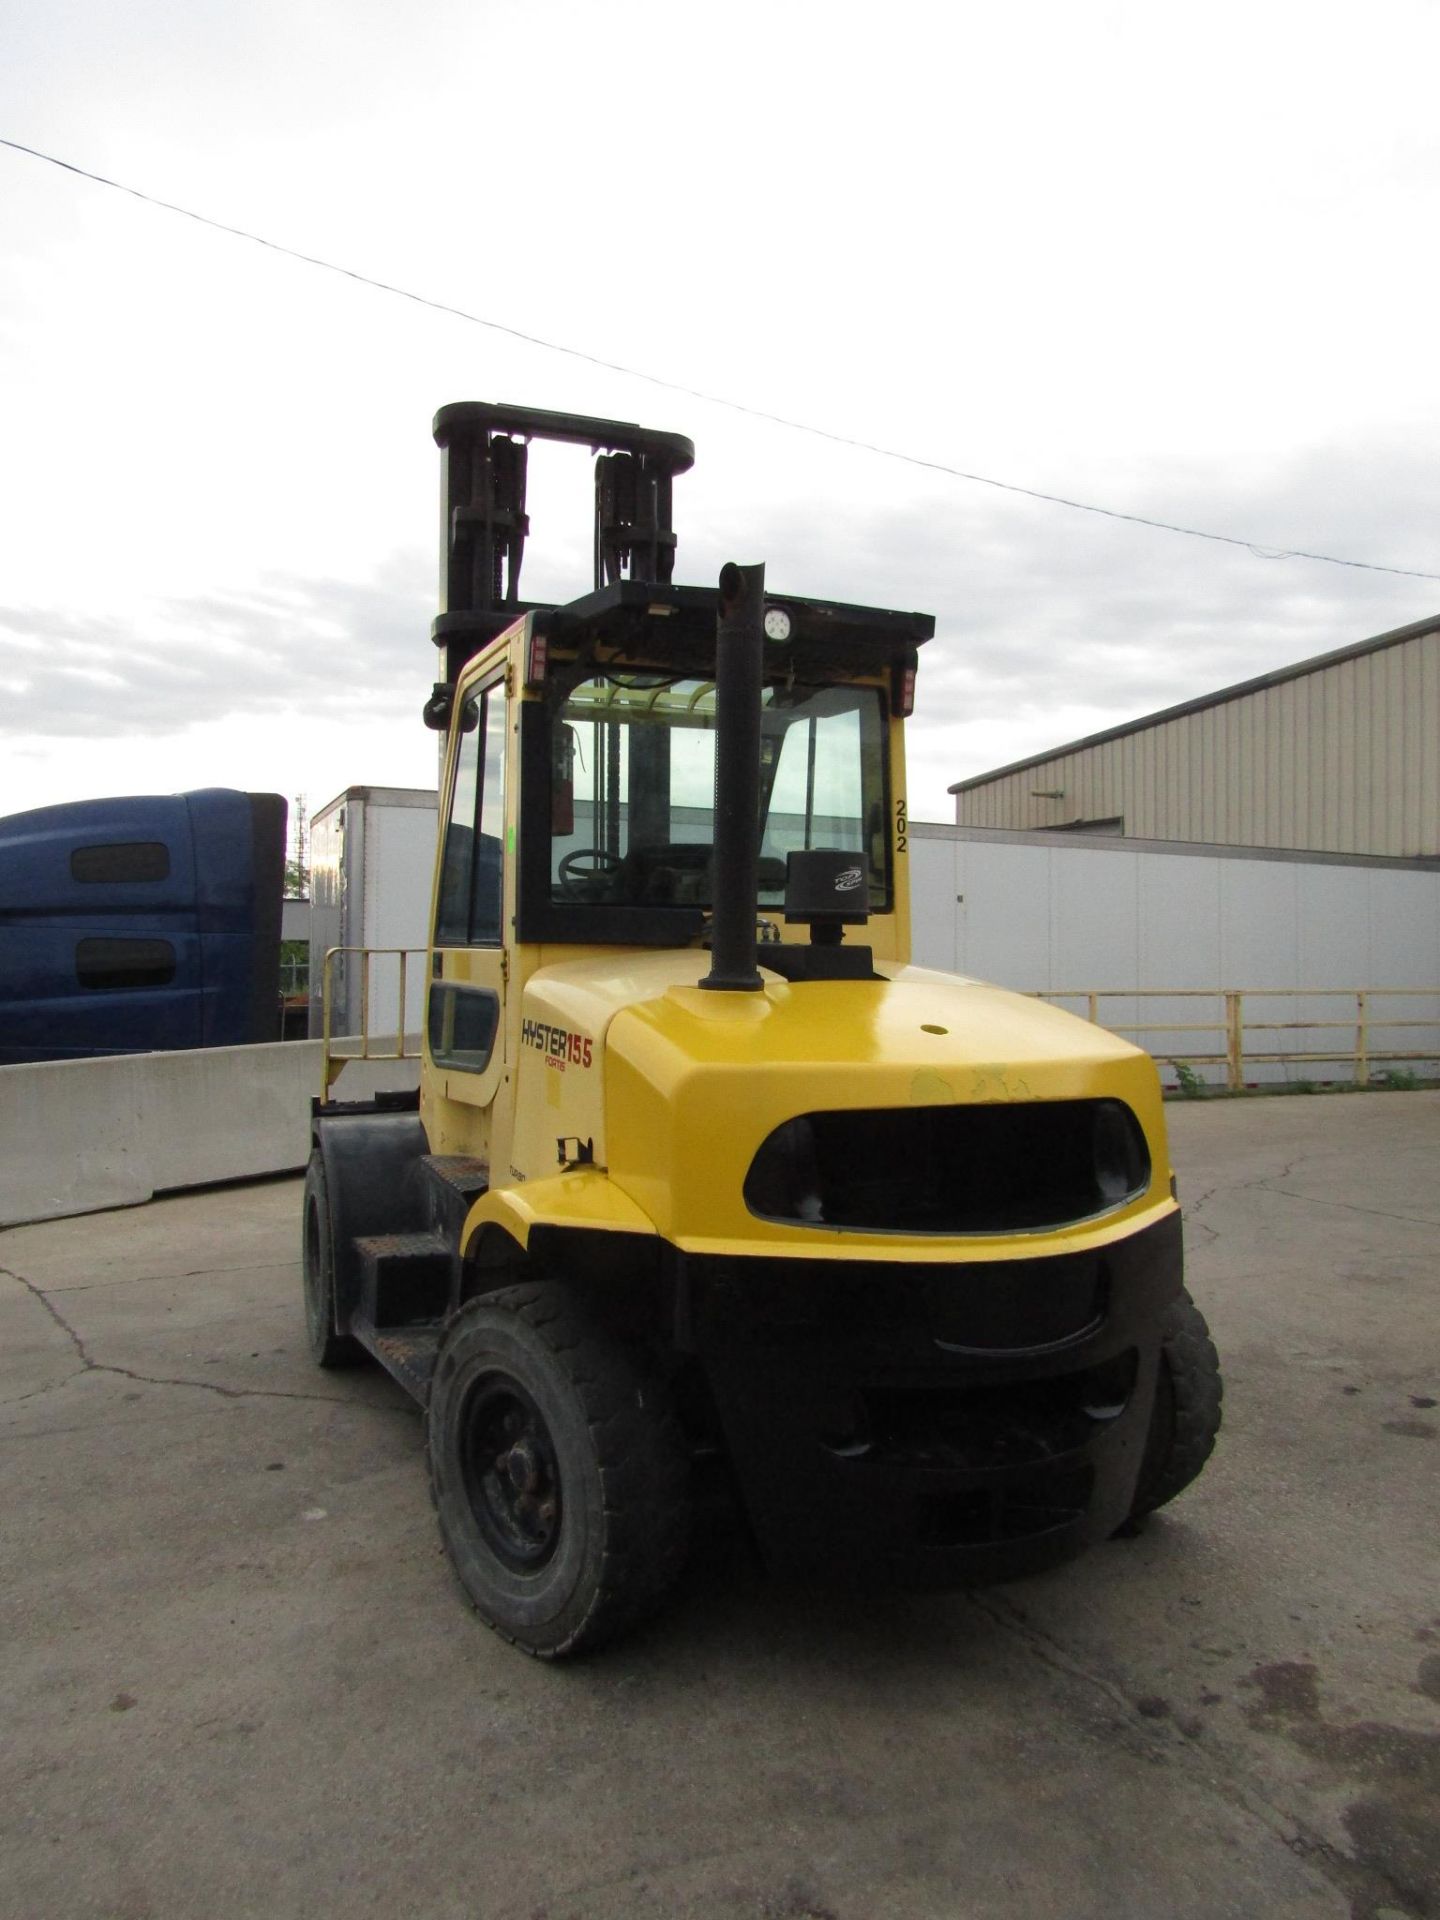 2012 Hyster 15500lbs Capacity OUTDOOR Forklift A/C & Heated CAB with sideshift & 72" forks LOW HOURS - Image 2 of 3